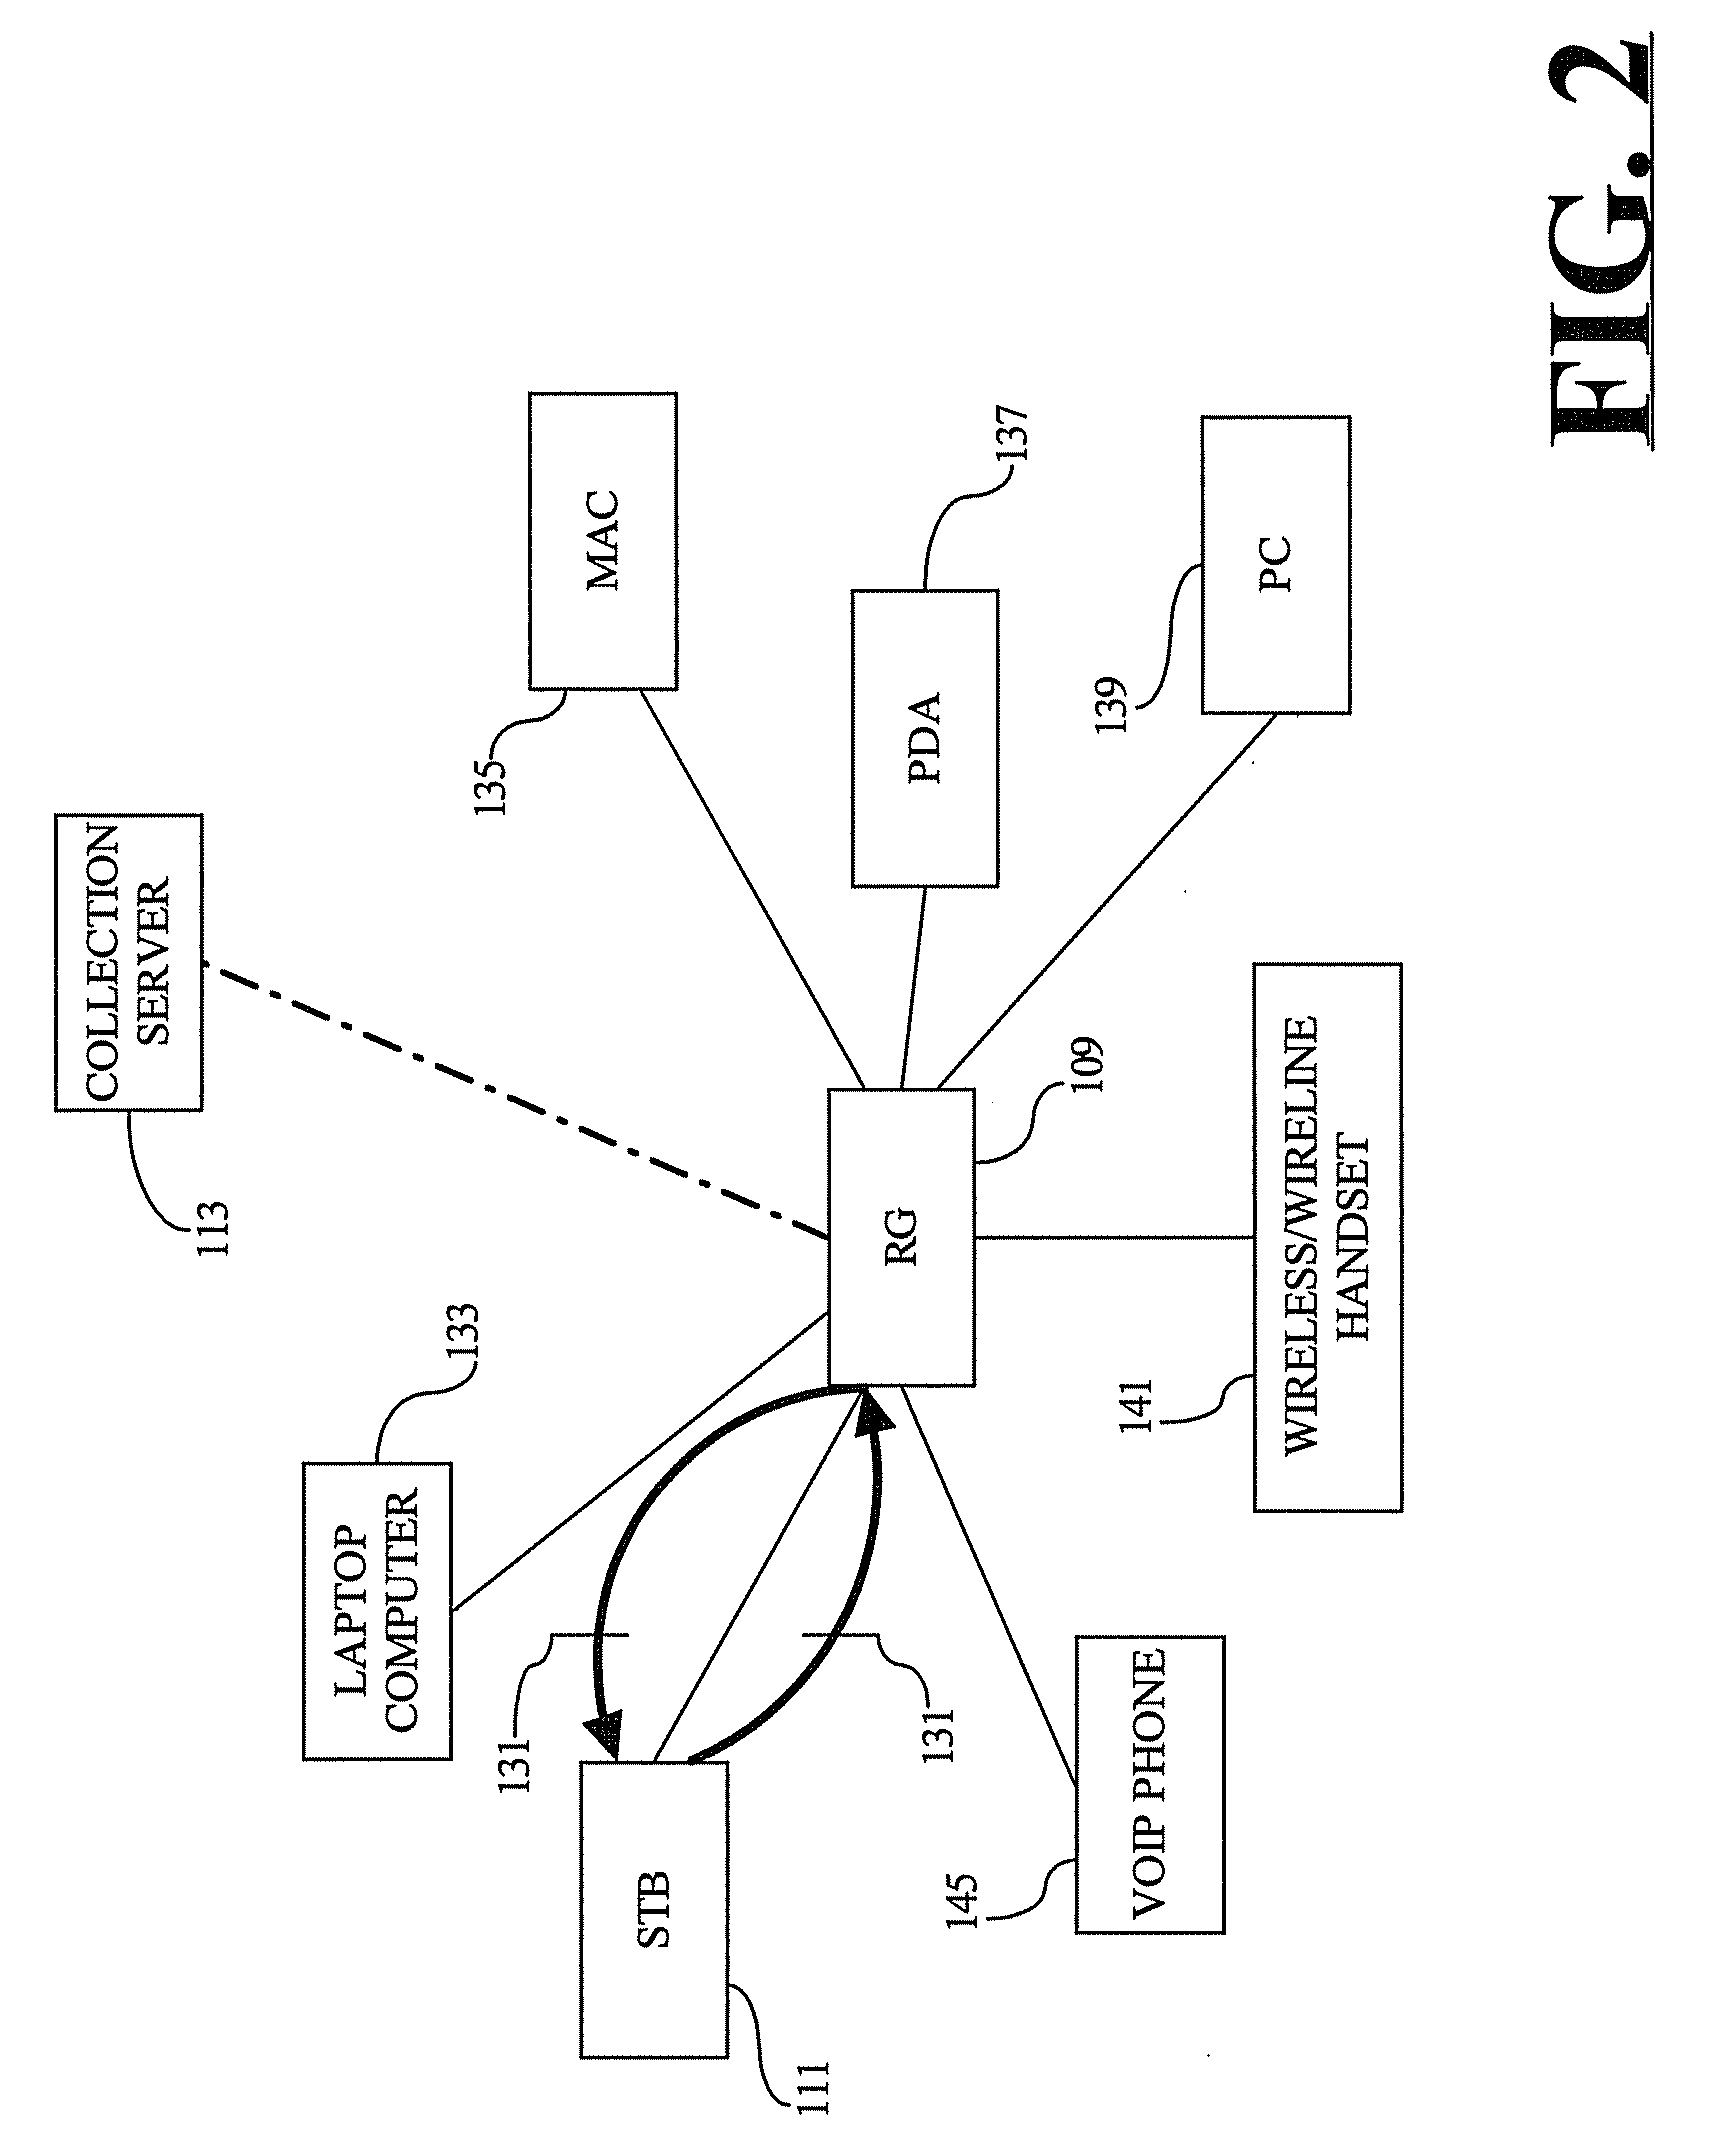 Gathering traffic profiles for endpoint devices that are operably coupled to a network